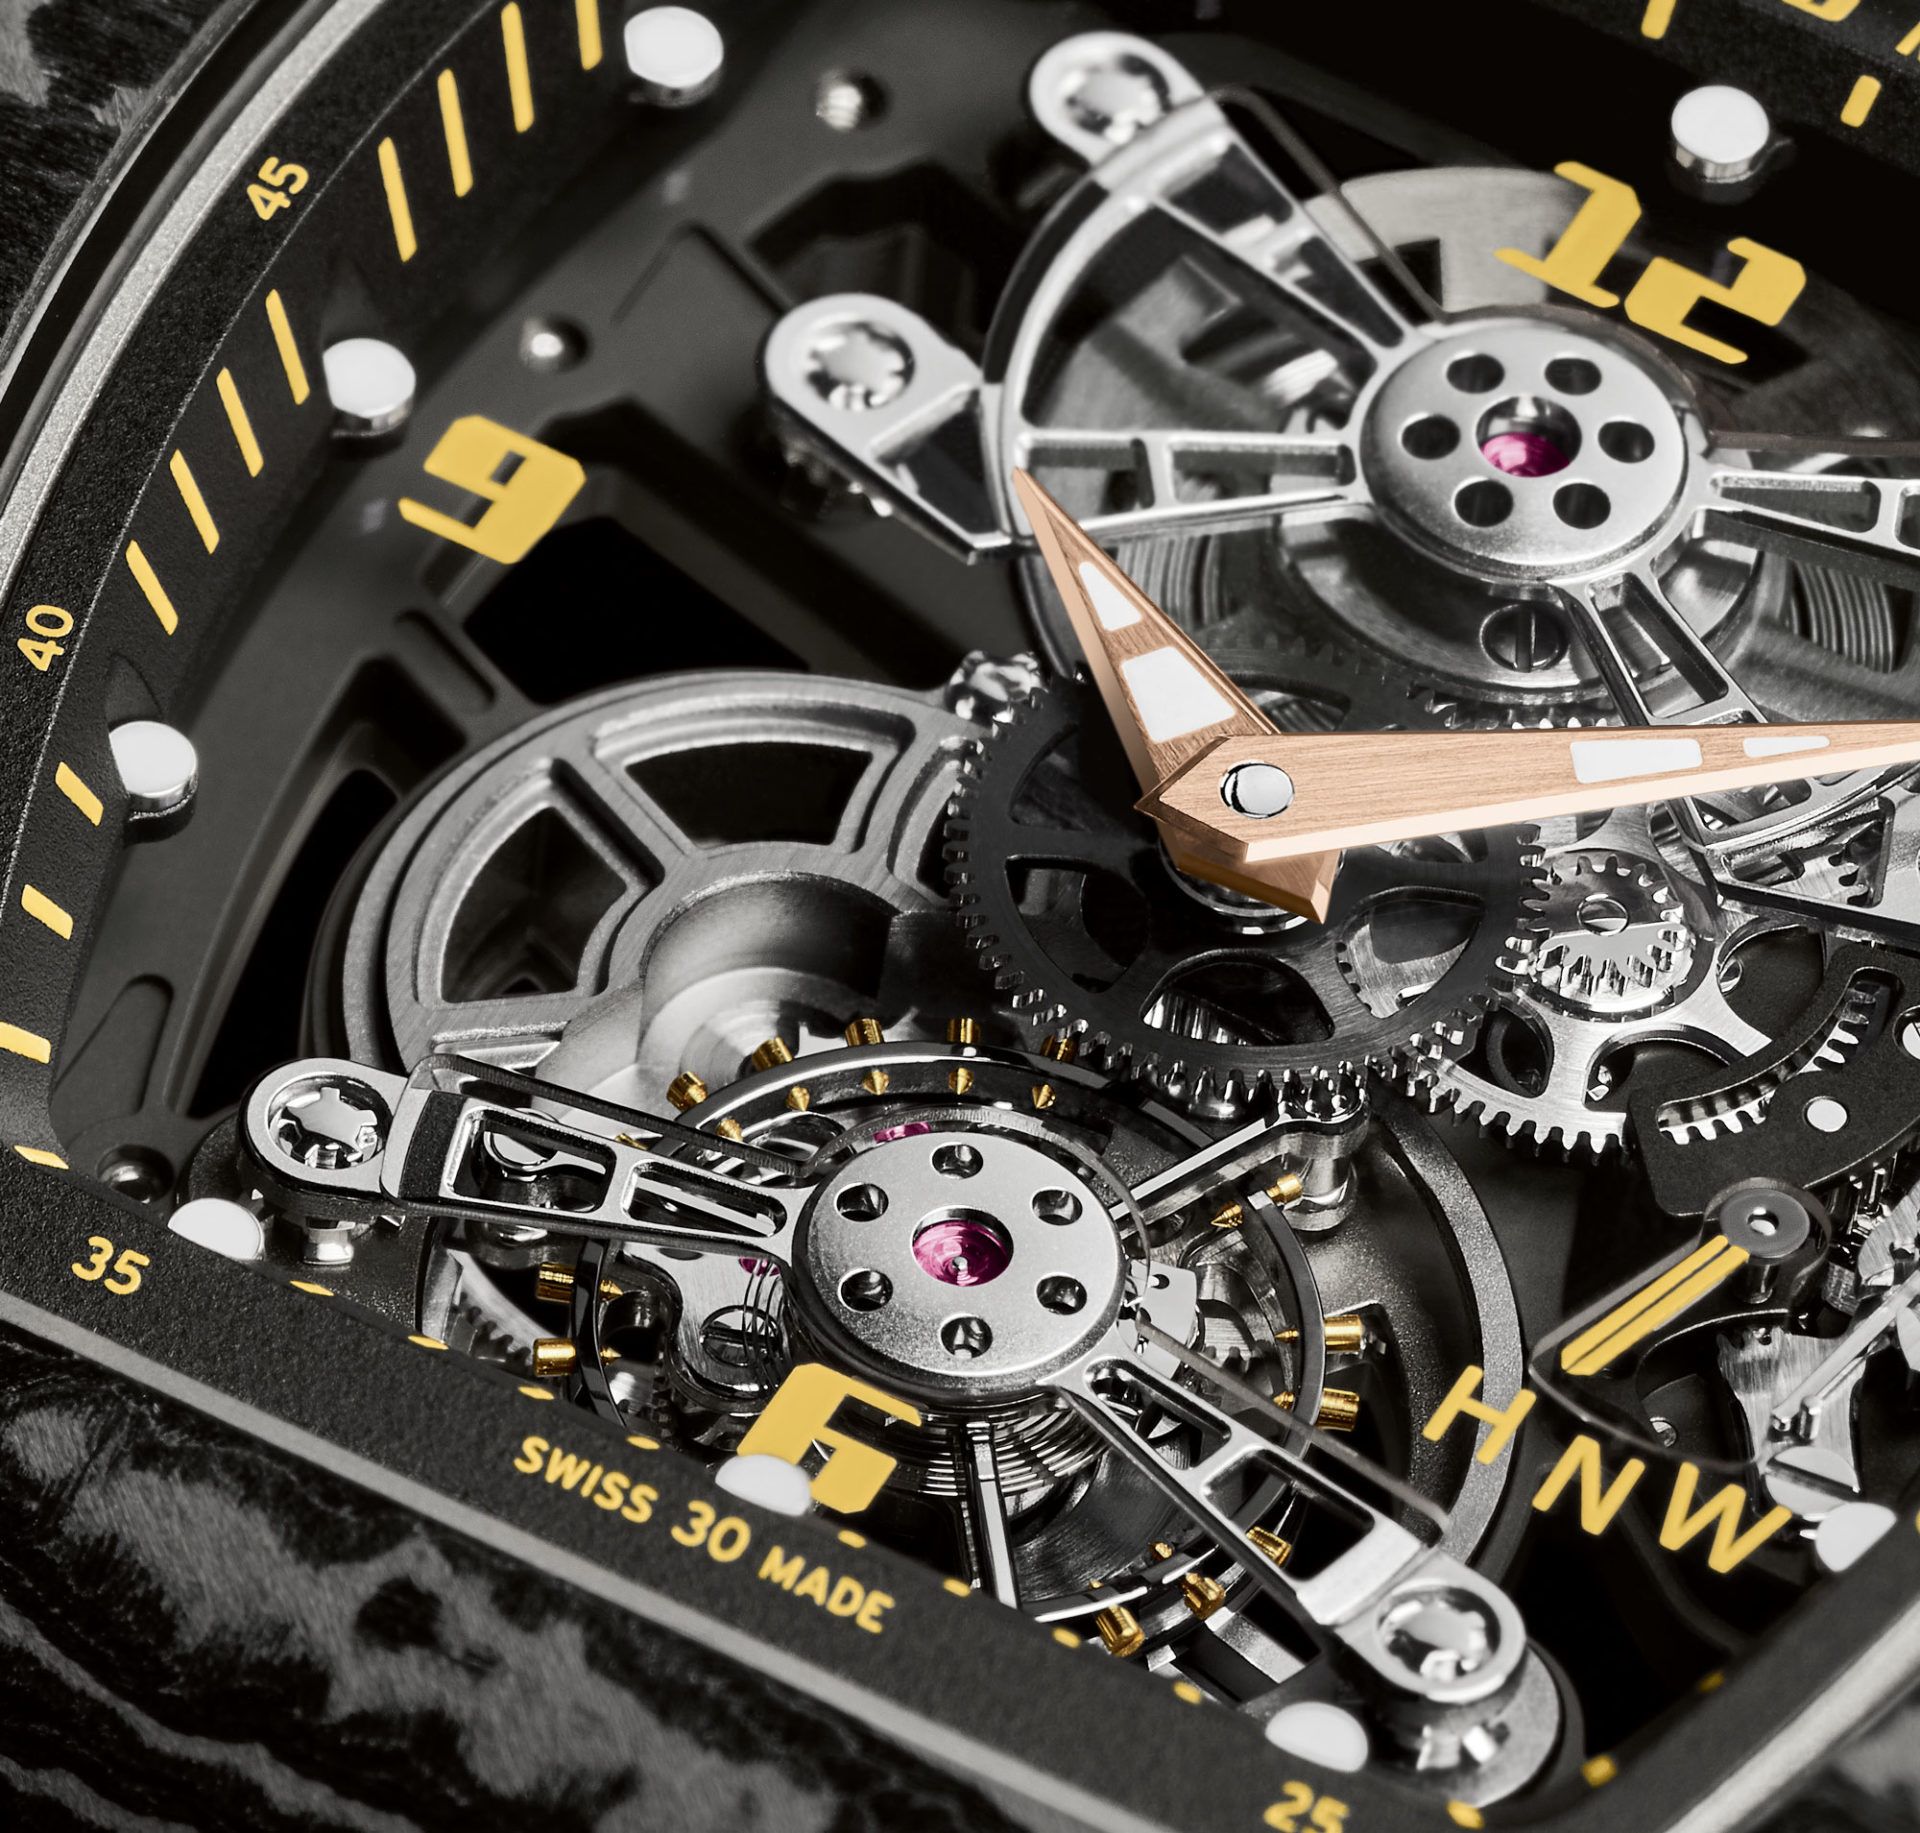 Richard Mille RM 11-03 McLaren 03/2019Richard Mille RM 11-03 McLaren Flyback Chronograph Carbon